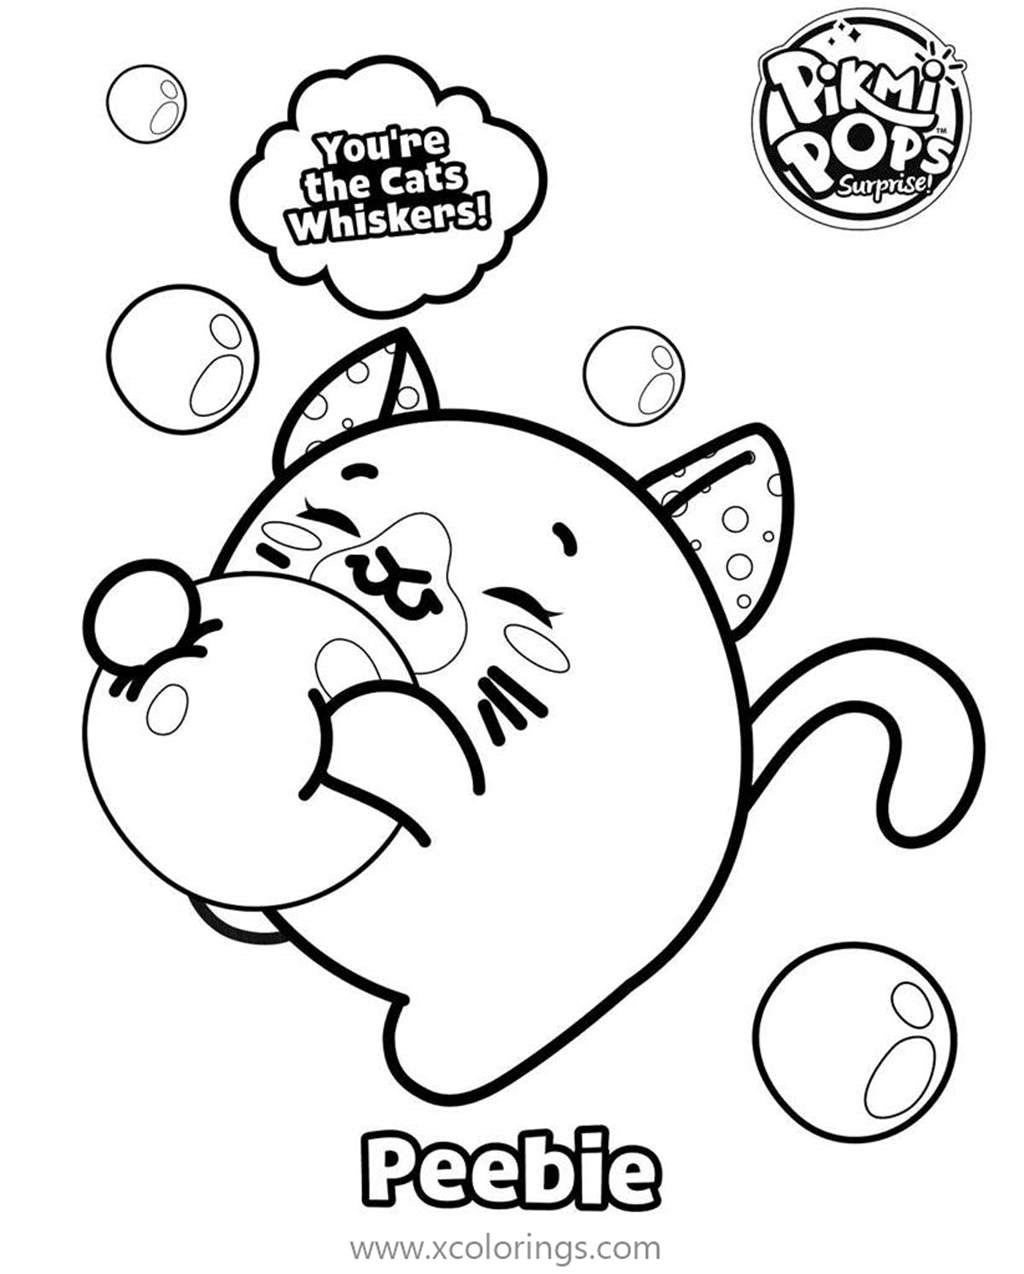 Free Peebie from Pikmi Pops Coloring Pages printable